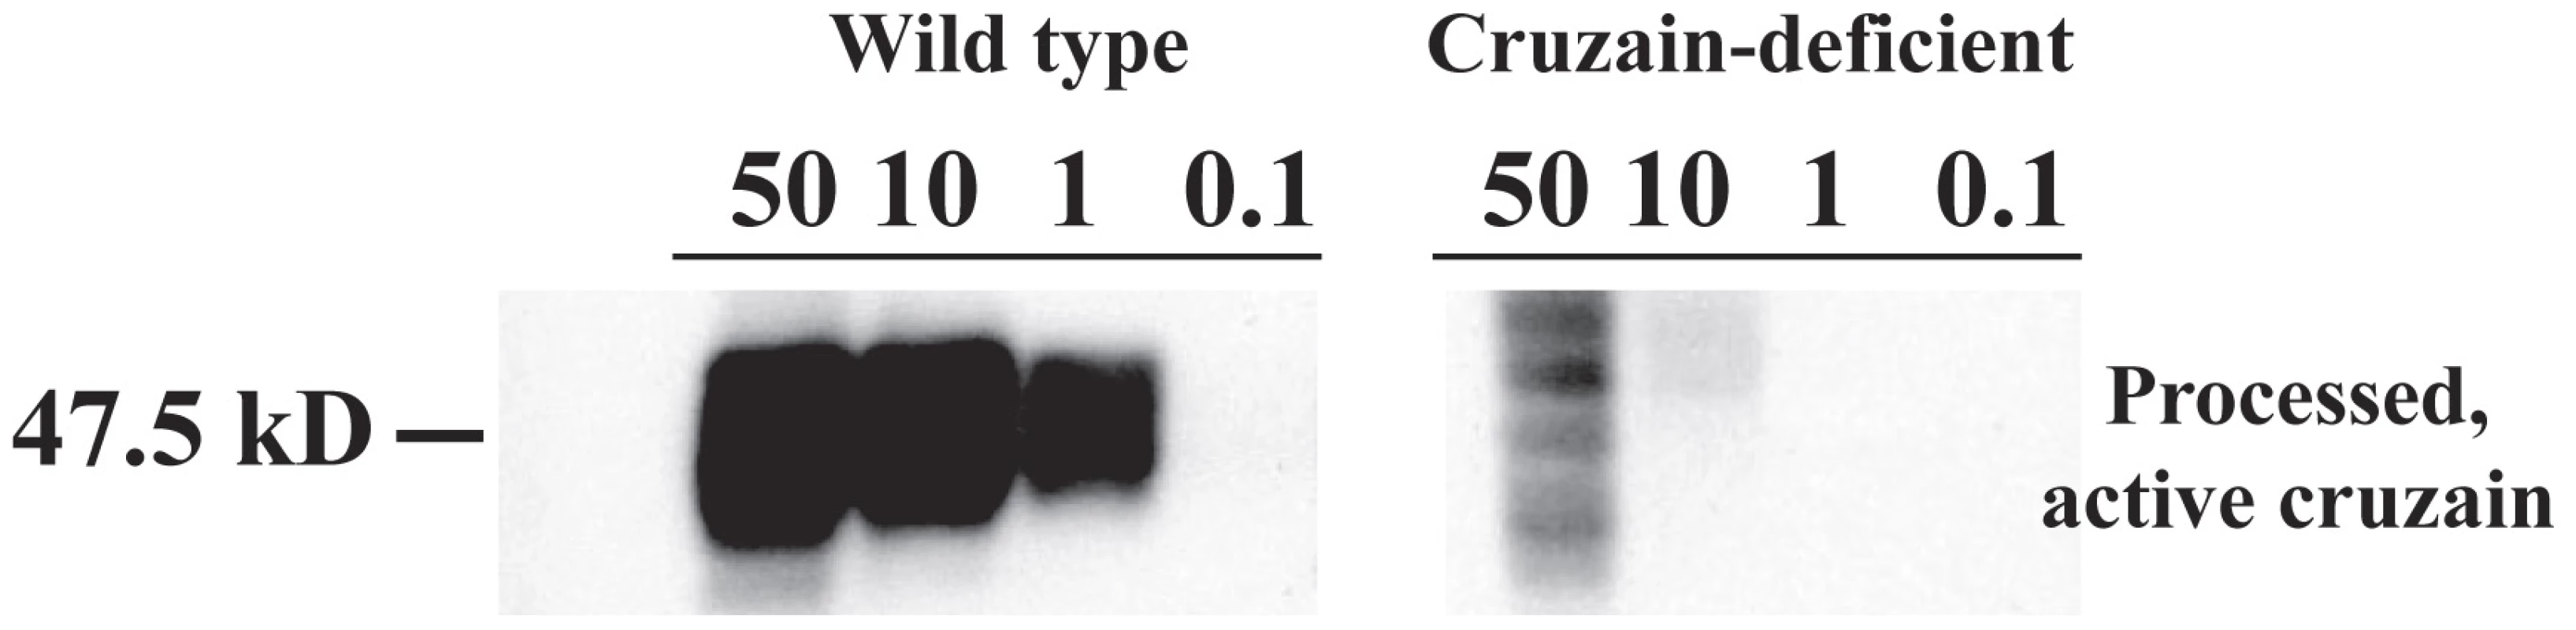 An active site affinity tag identifies processed active proteases of wild type and cruzain deficient <i>T. cruzi.</i>